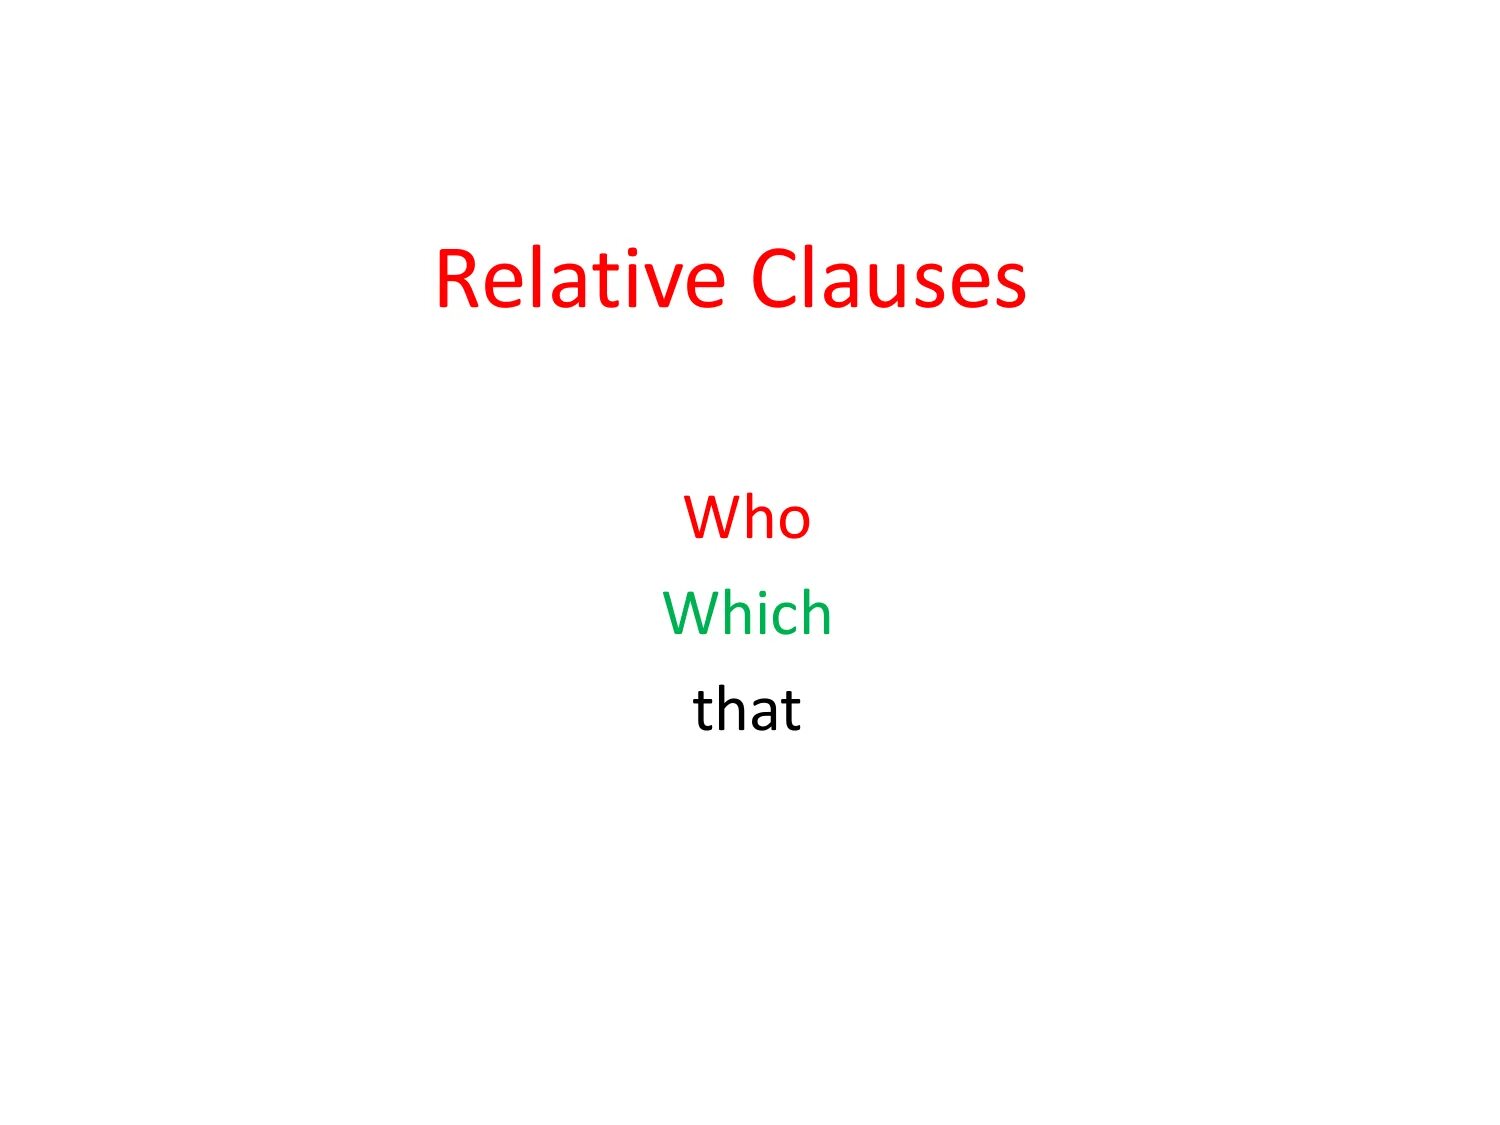 Who whom whose where перевод. That who which в английском. Who that which употребление. Relative Clauses who which that. Местоимения that who which.